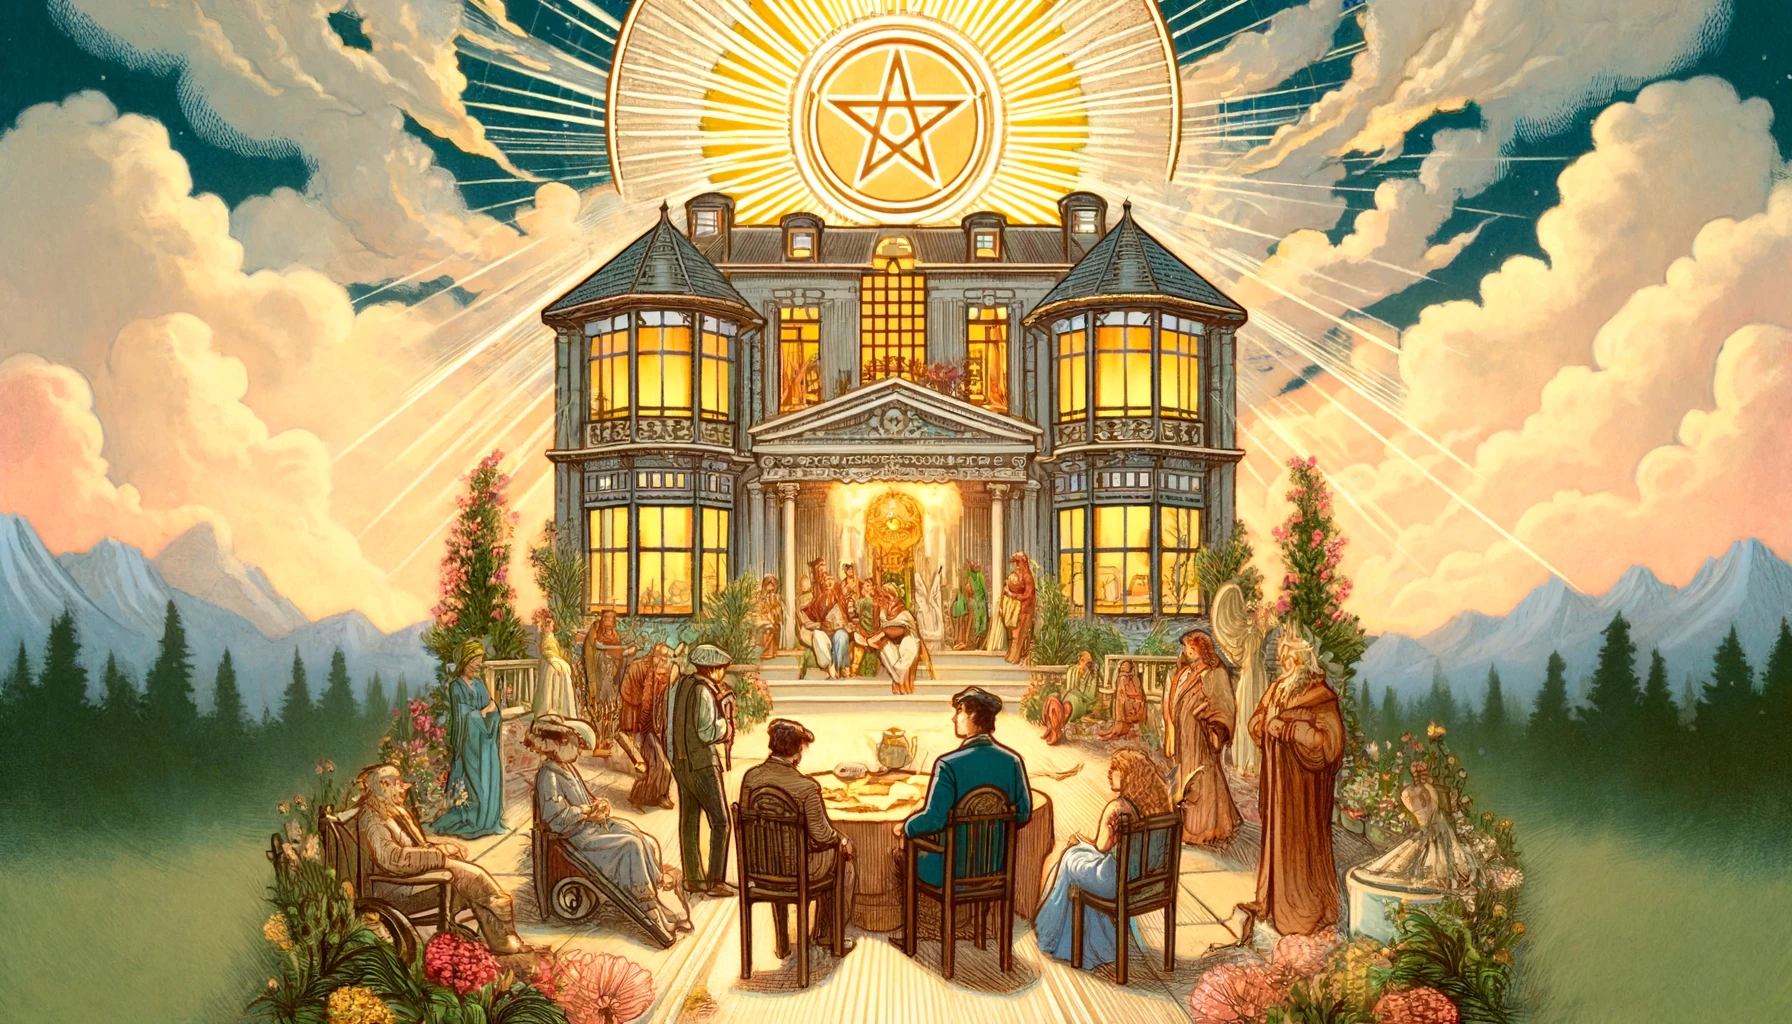 The image vividly suggests a positive, affirmative outcome, reflecting the card's themes of wealth, legacy, and long-term success. It emphasizes the positive aspects of wealth accumulation, family harmony, and the successful culmination of efforts, set against a backdrop that evokes a sense of security and abundance. The visualization conveys a feeling of prosperity and contentment, symbolizing the fulfillment of aspirations and the attainment of enduring success.